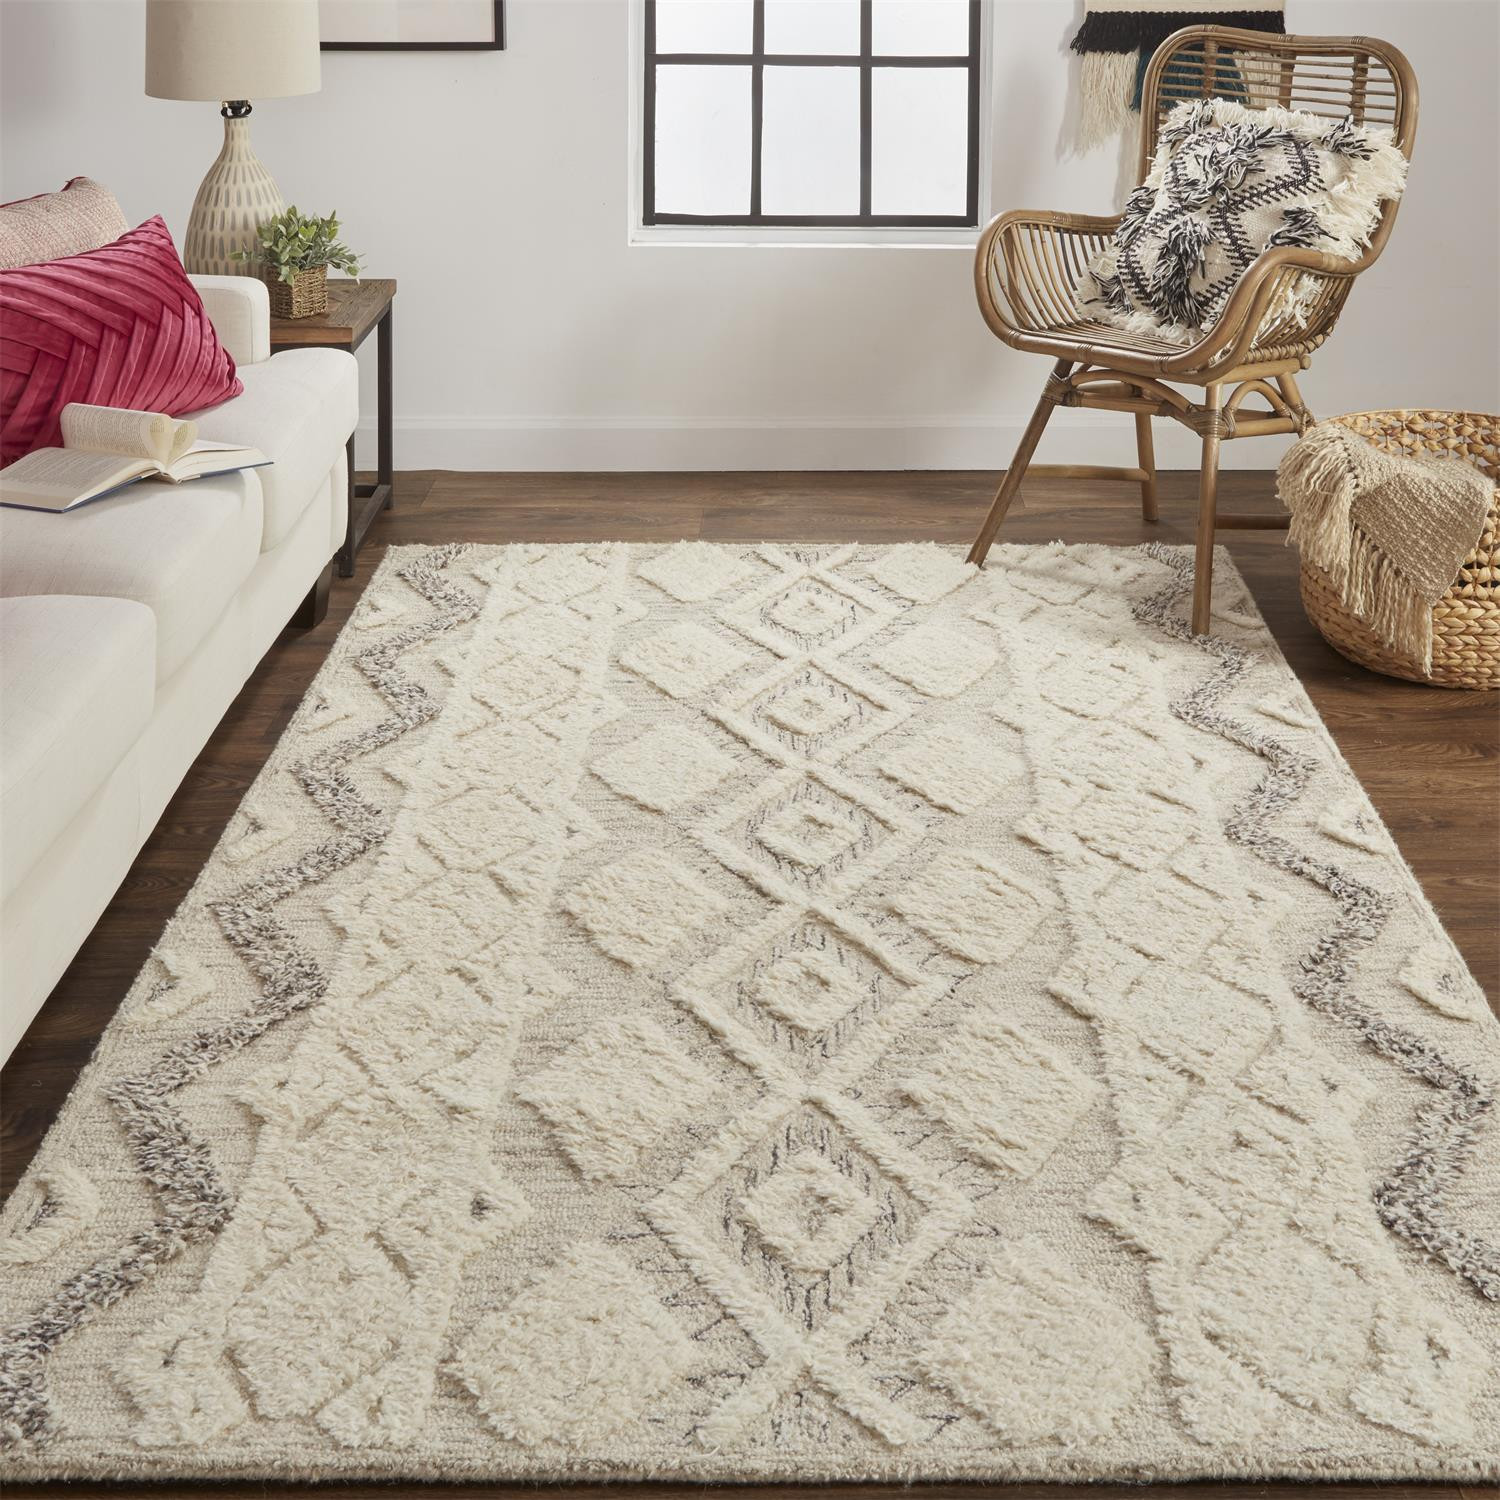 10' X 14' Ivory Taupe And Gray Wool Geometric Tufted Handmade Stain Resistant Area Rug-512778-2